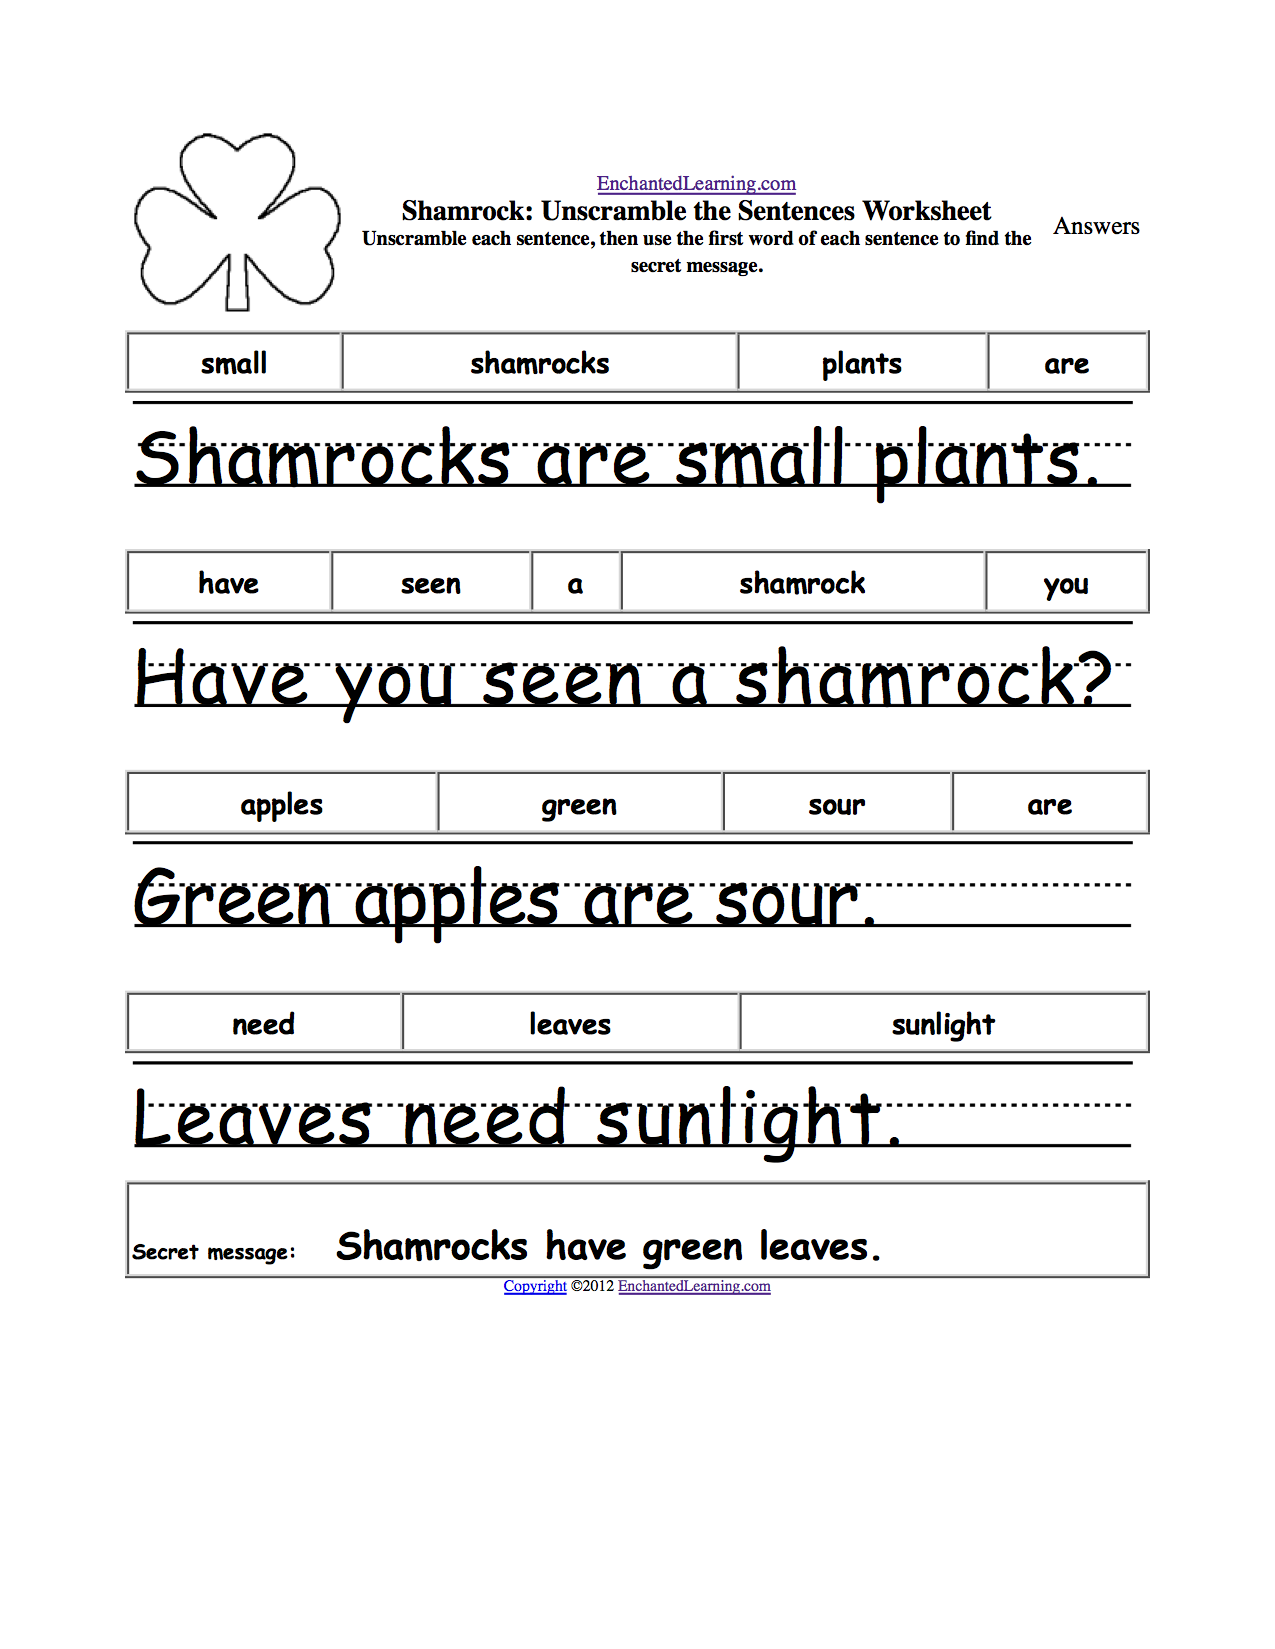 st-patrick-s-day-crafts-for-kids-enchanted-learning-software